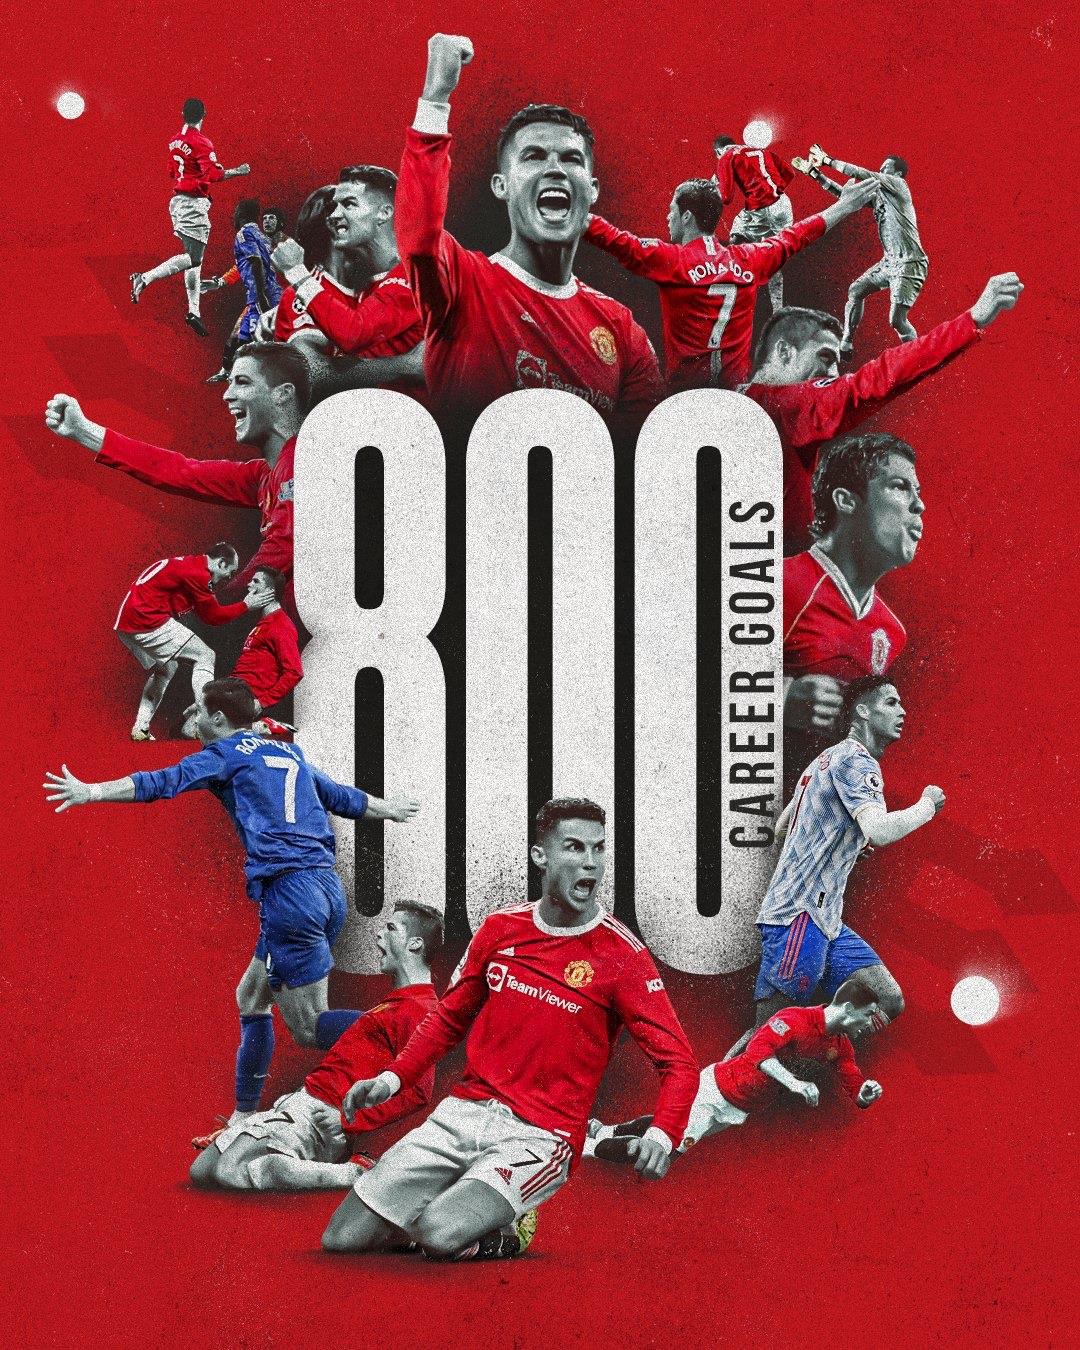 Afghanistan - Cristiano Ronaldo, the first player in history to score 800 goals in official matches